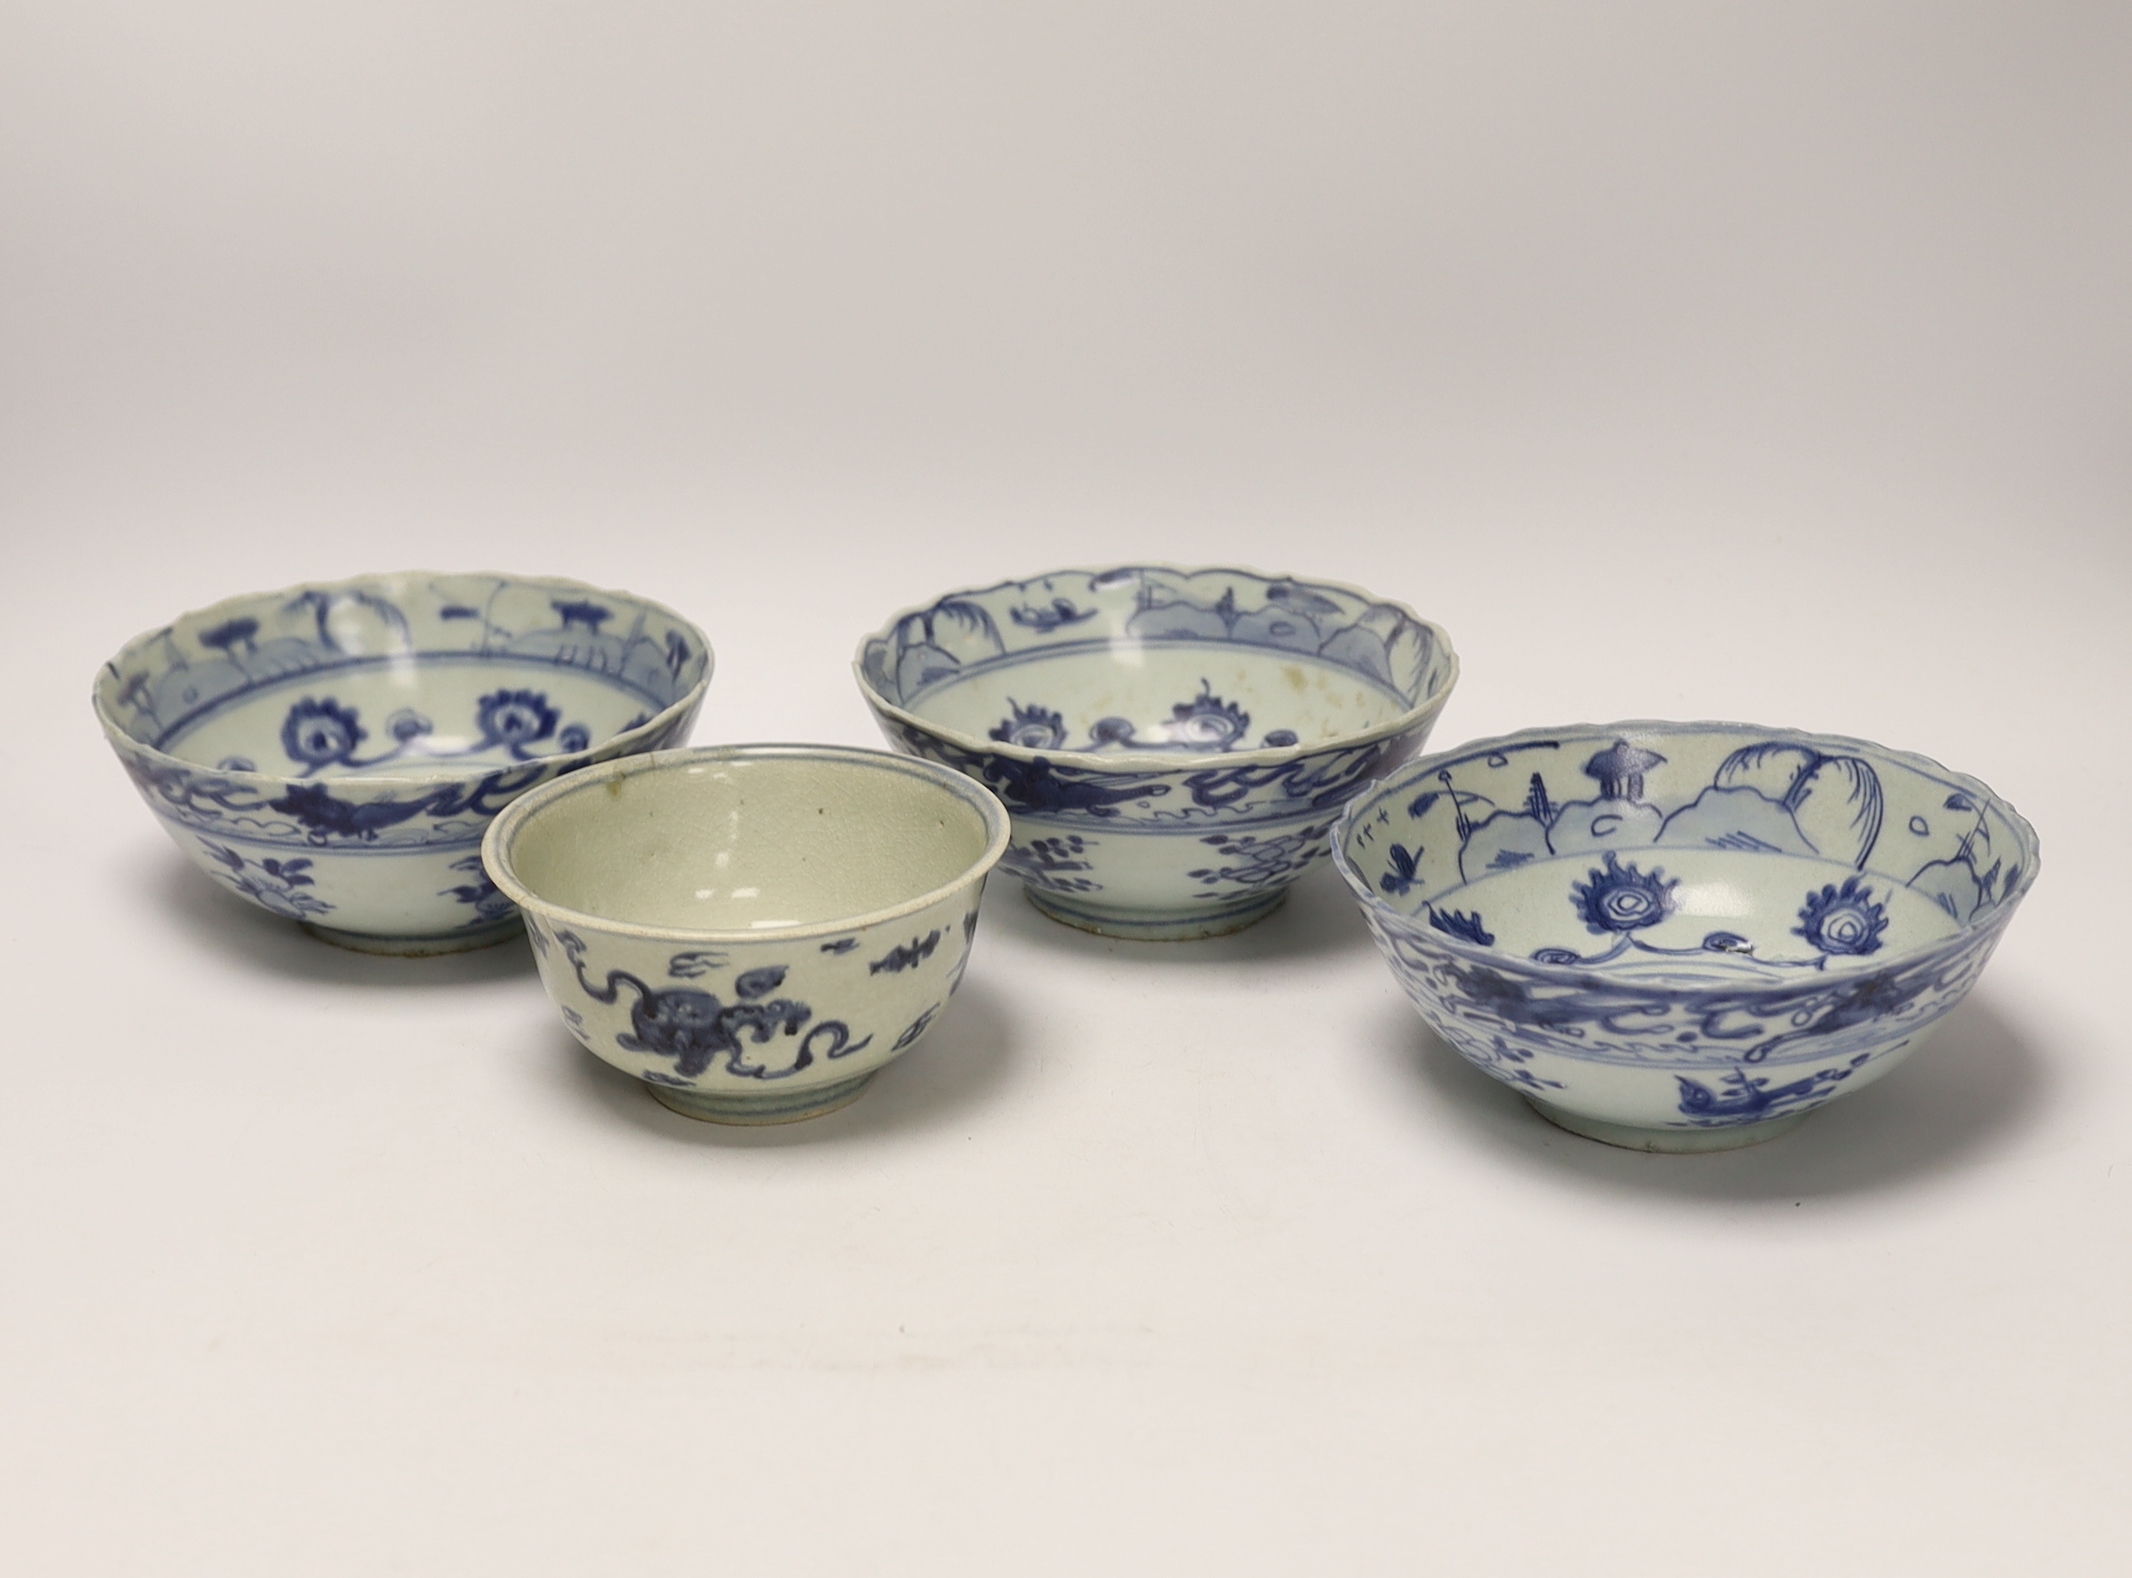 Four 16th/17th century Chinese Ming blue and white bowls, the three larger bowls from the Hatcher